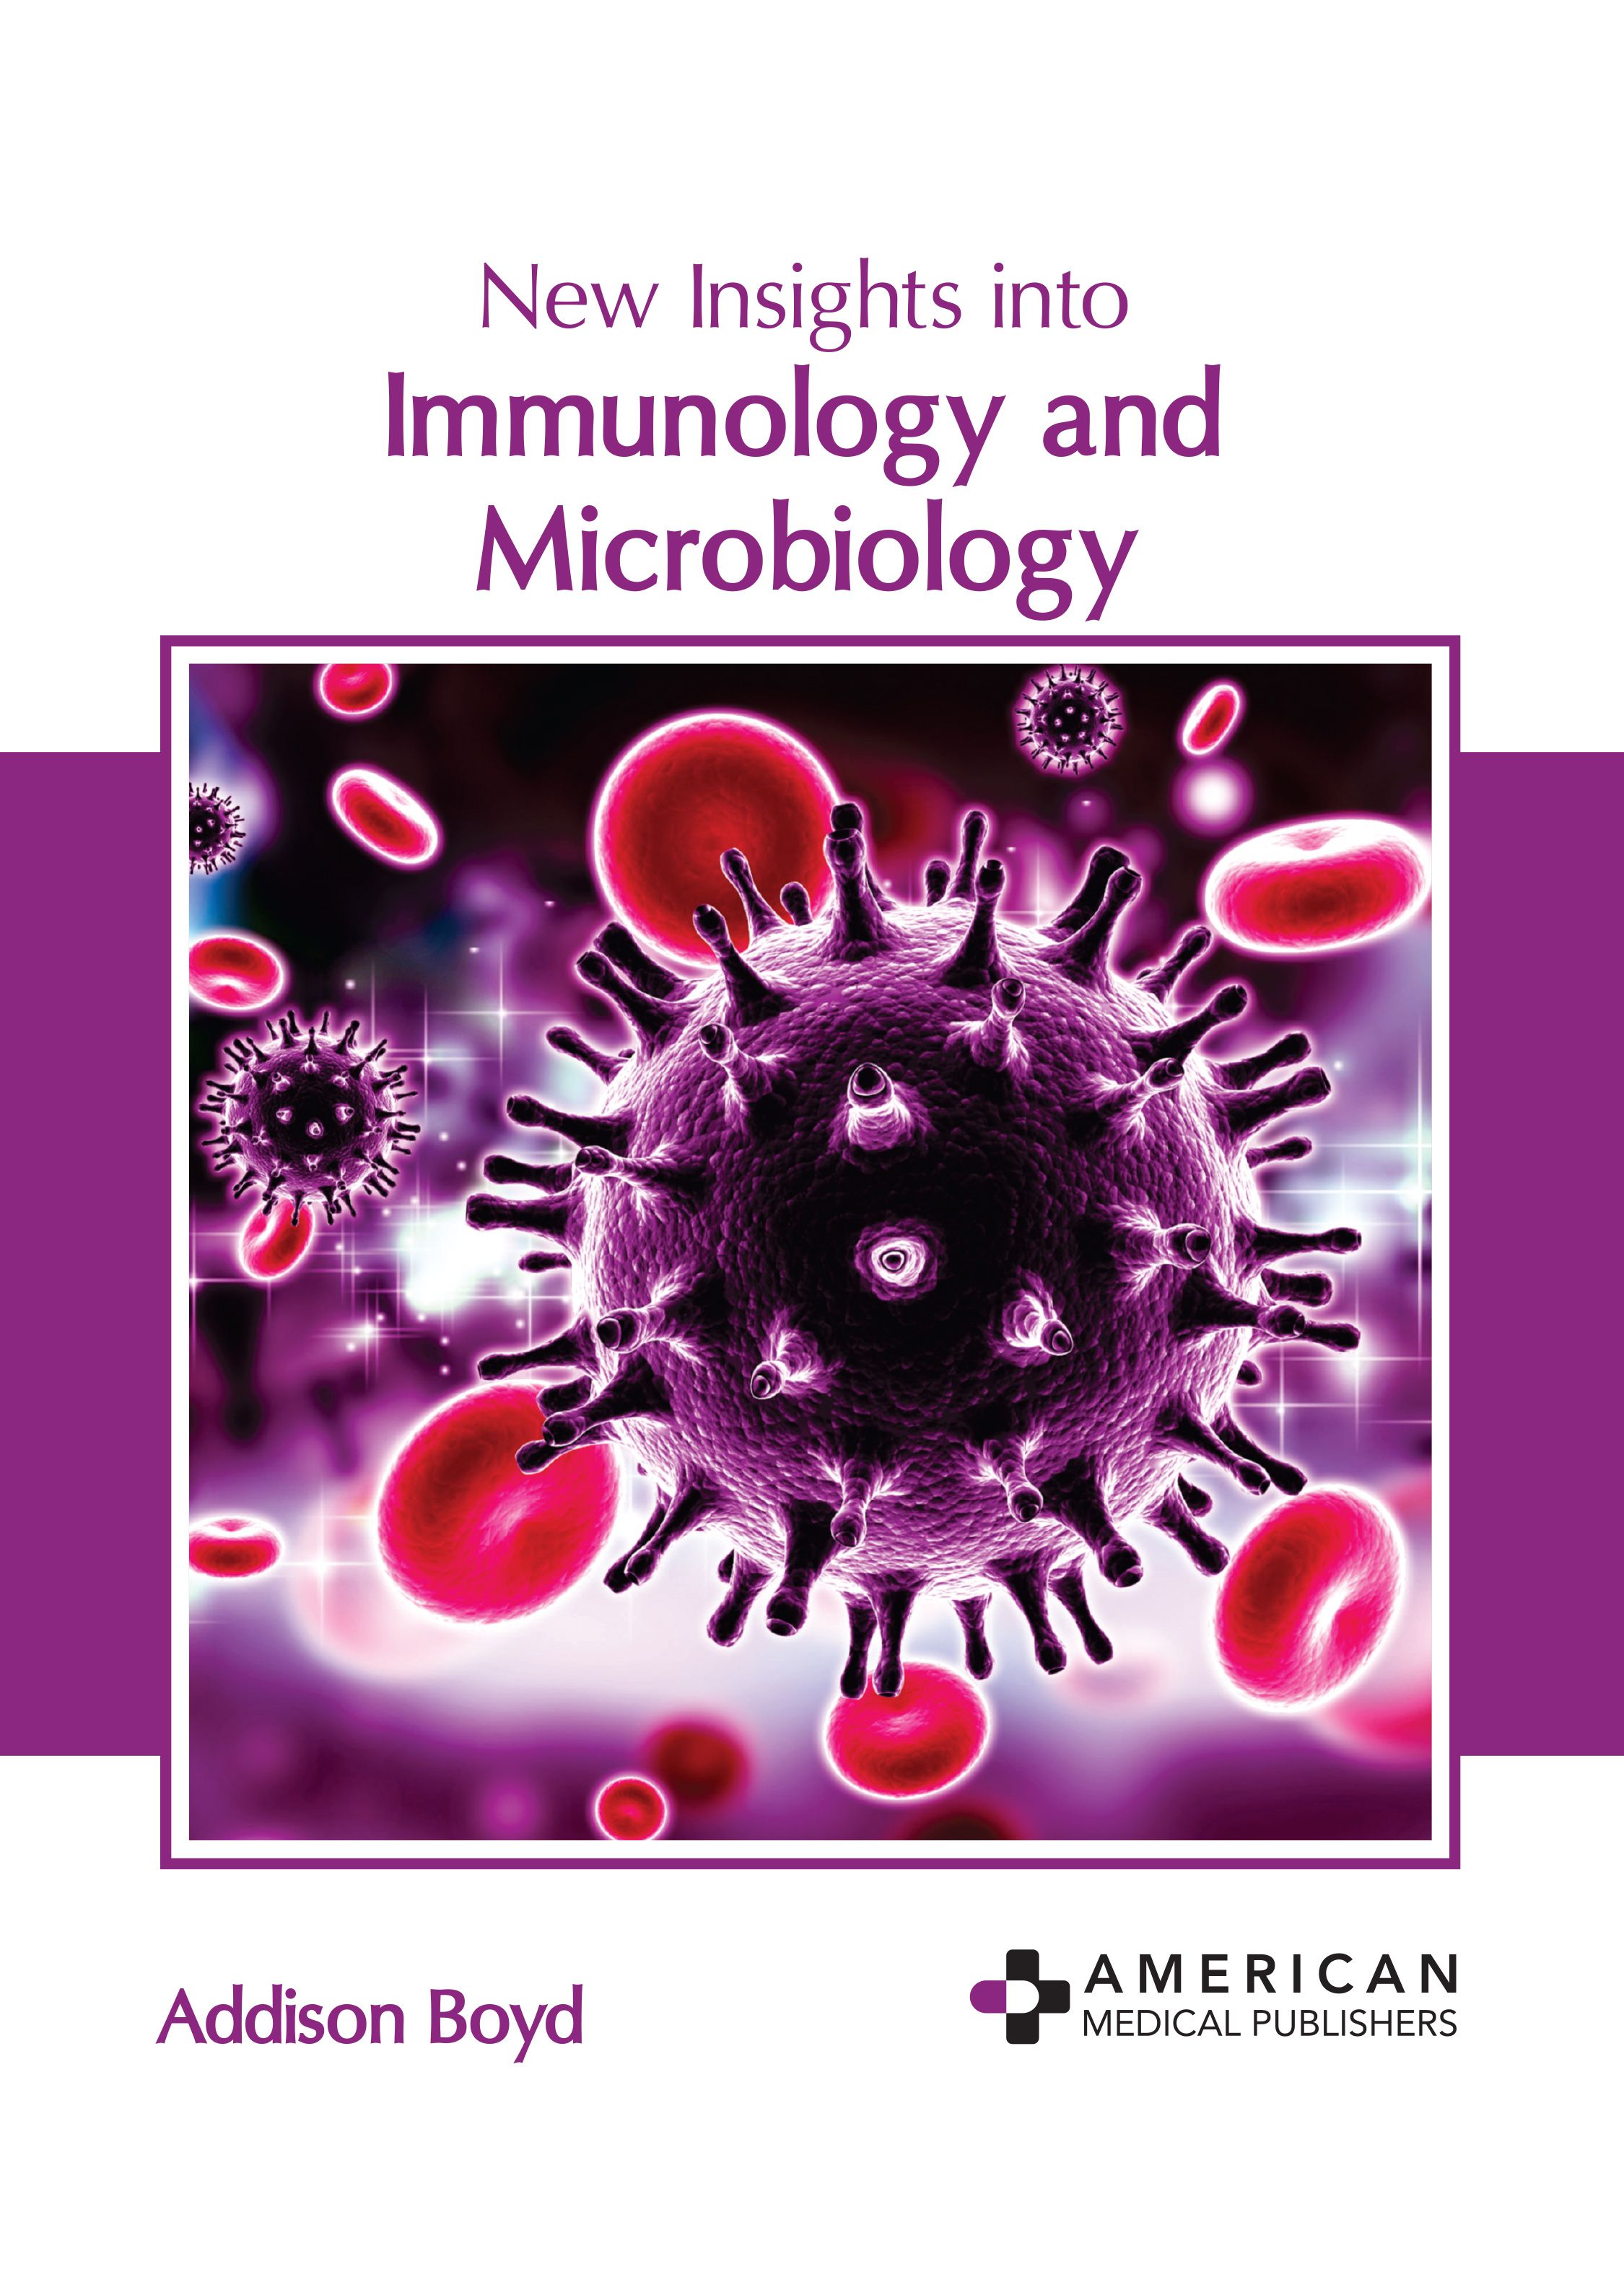 NEW INSIGHTS INTO IMMUNOLOGY AND MICROBIOLOGY